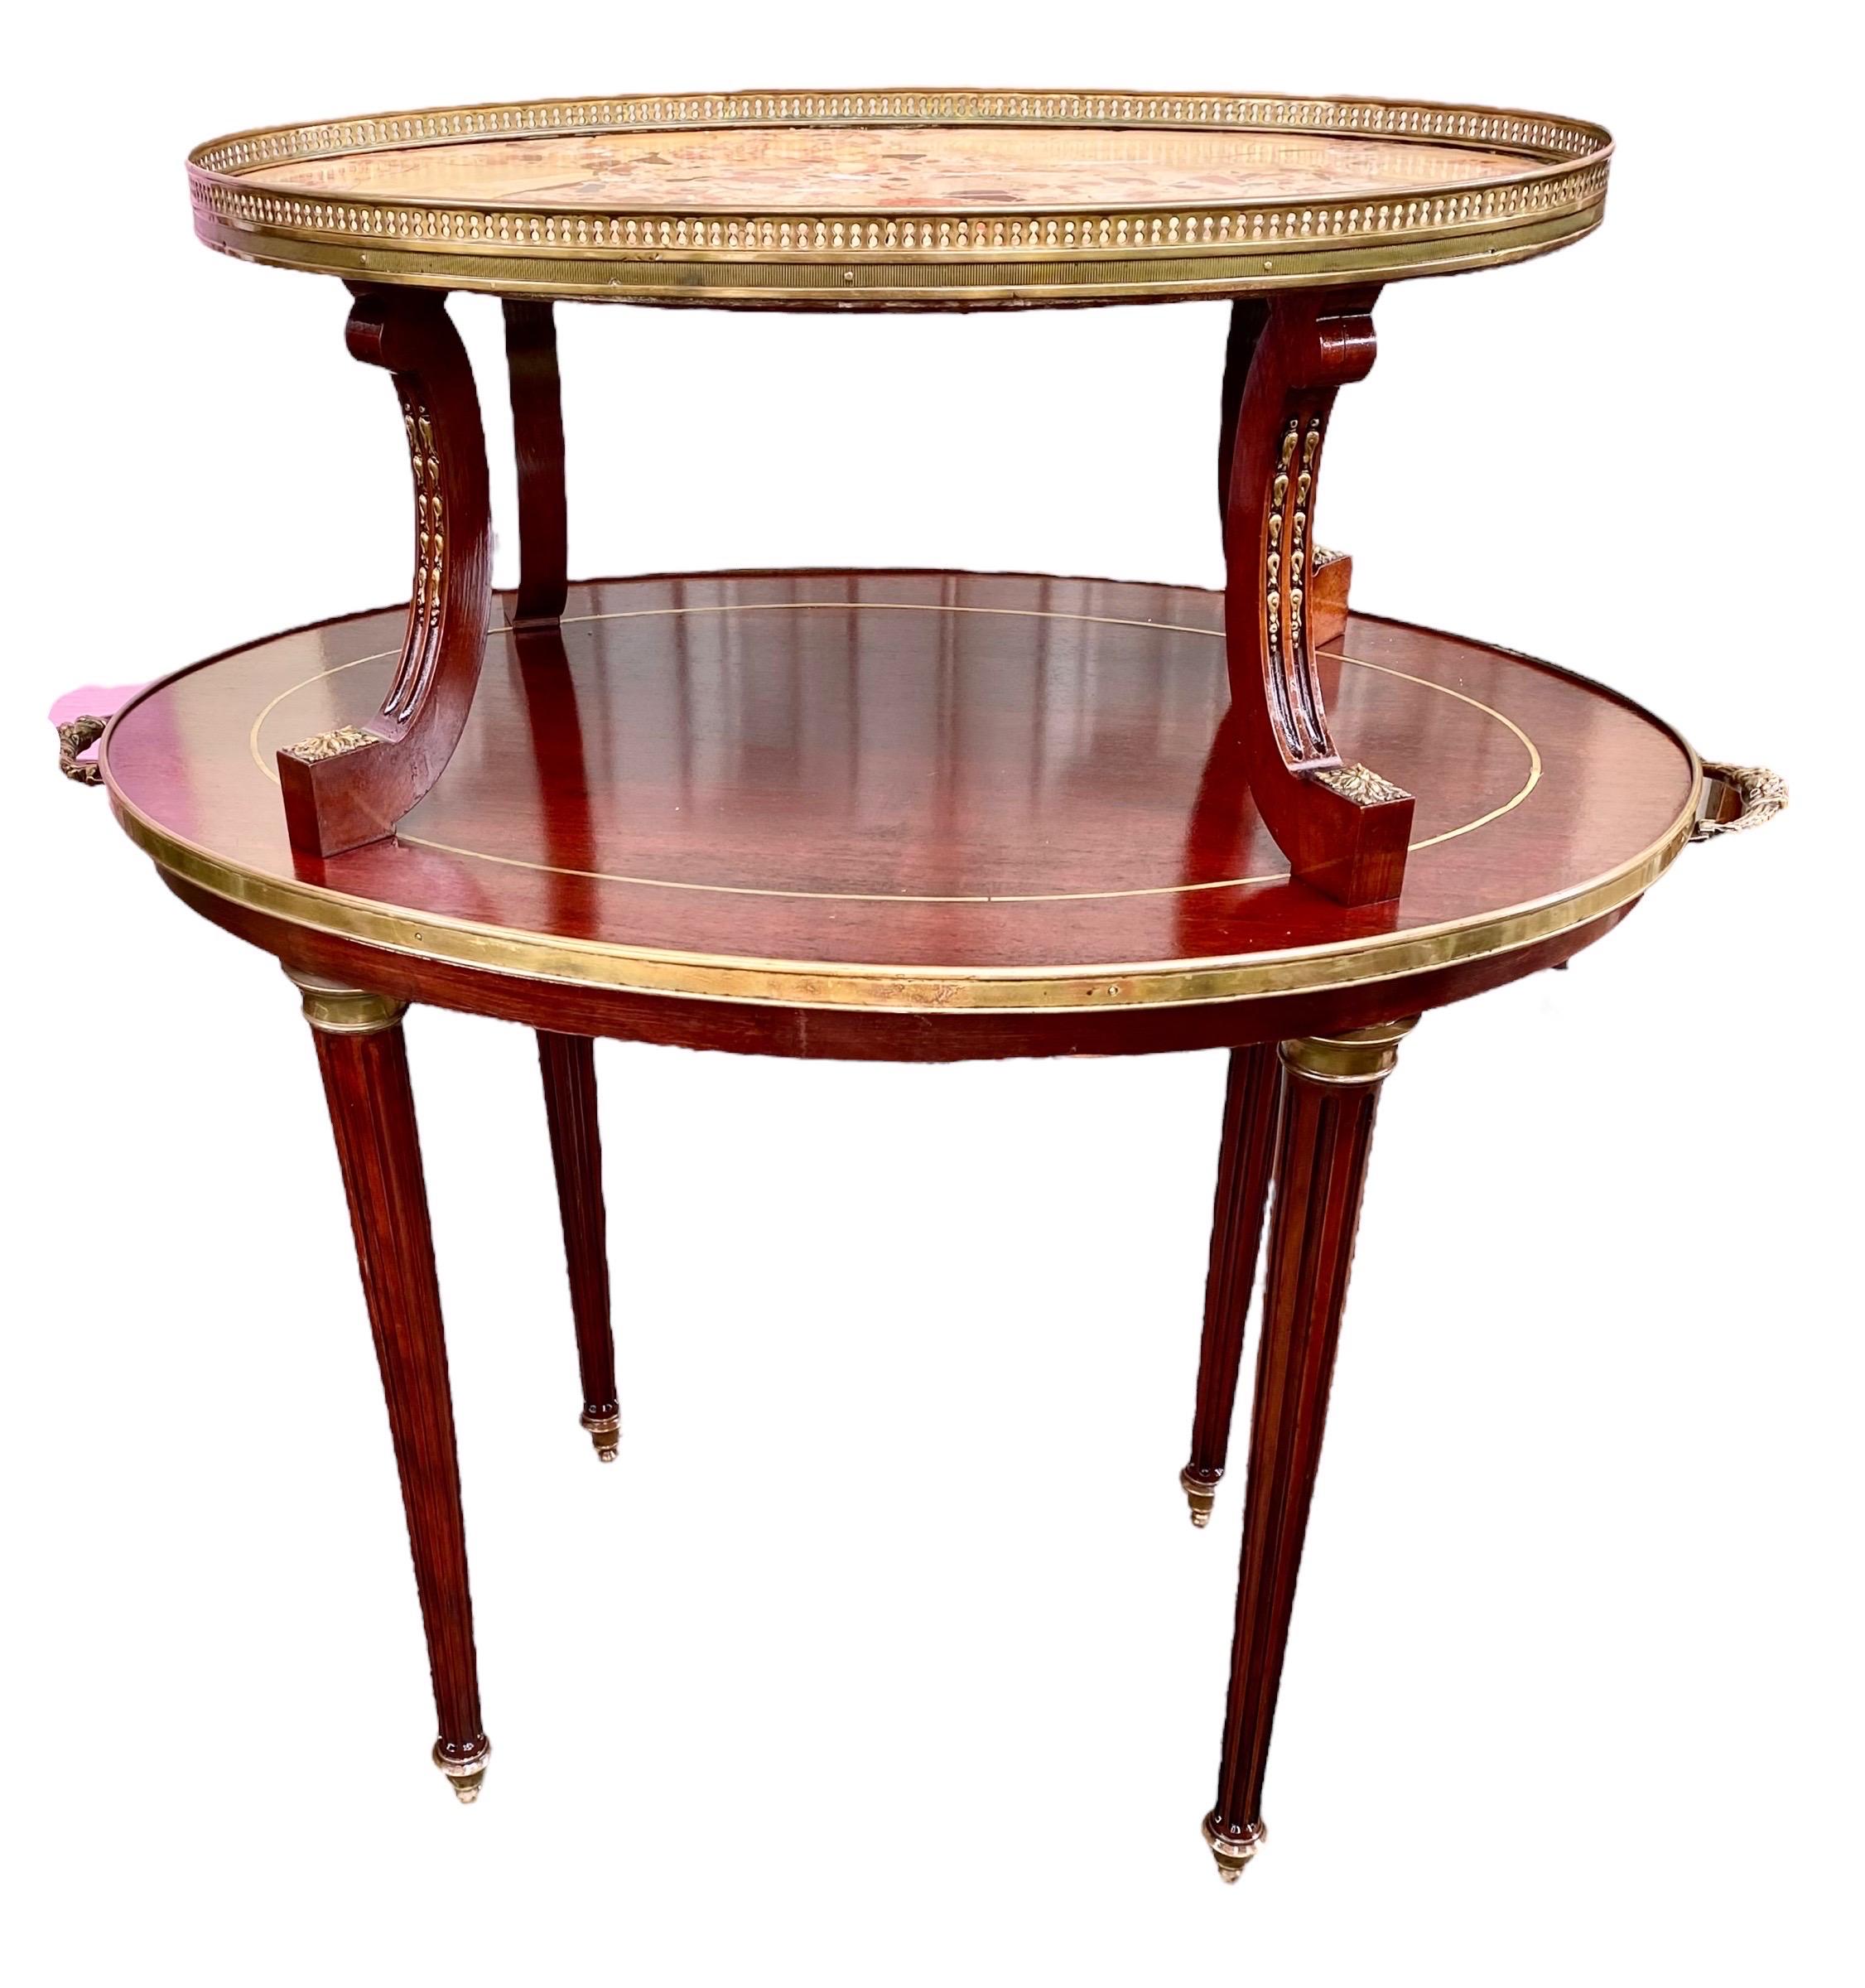 Gilt Antique French Louis XVI Style Mahogany Marble Top Desserte Table For Sale